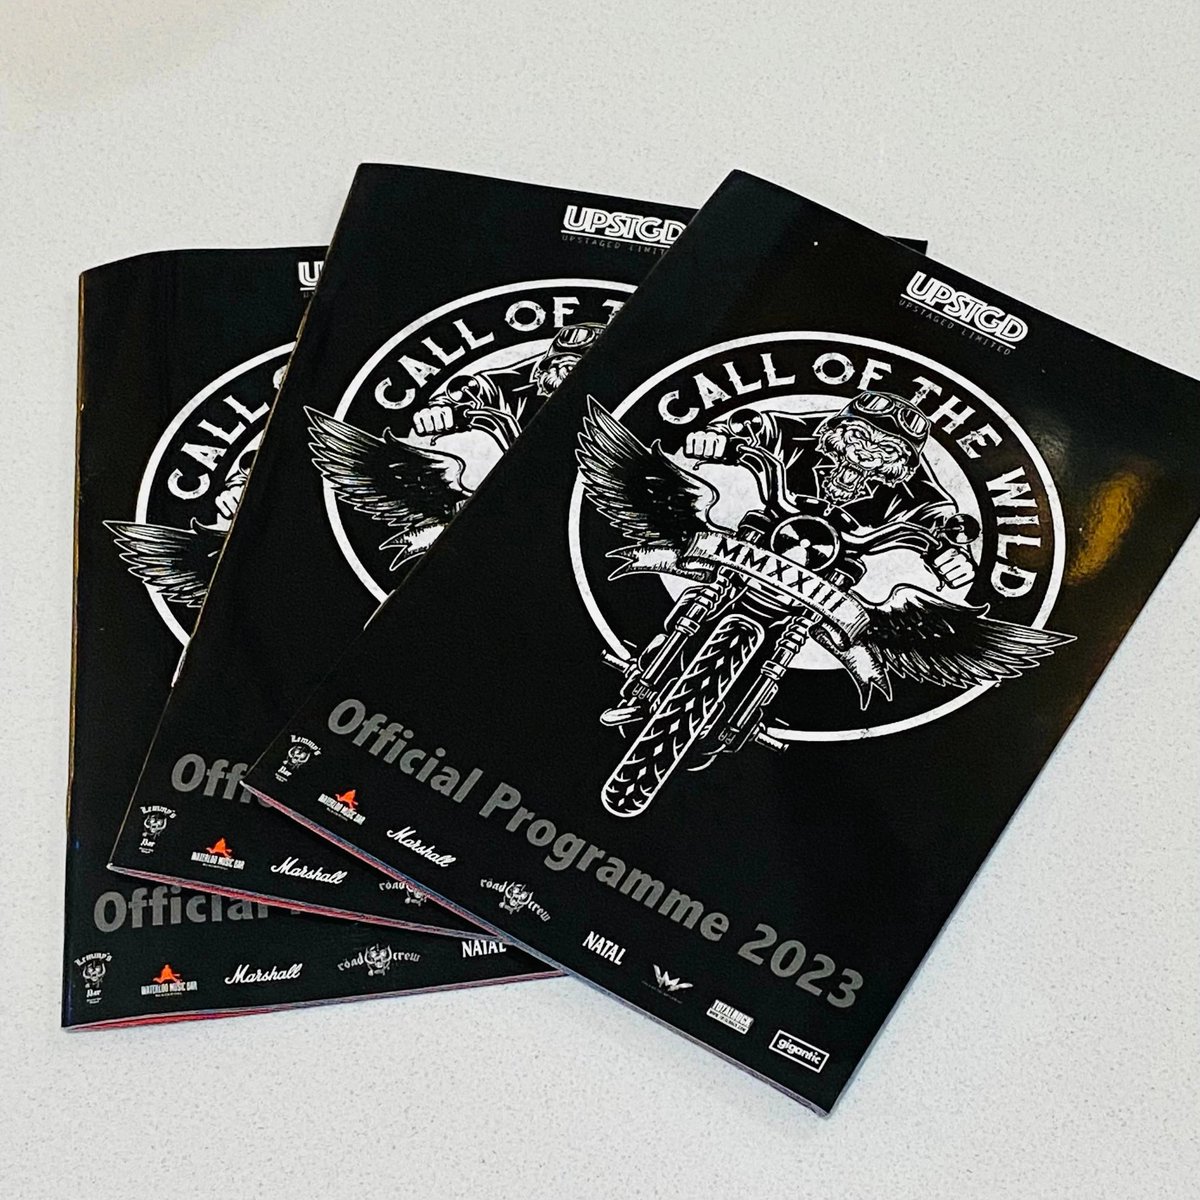 Official Call of the Wild Festival Programme available only at the event. #callofthewildfestival #COTW2023 #LimitedEdition @callofthewildf1 @Gigantic @LincsShowground @TotalRockOnline @TheWaterloo_BPL